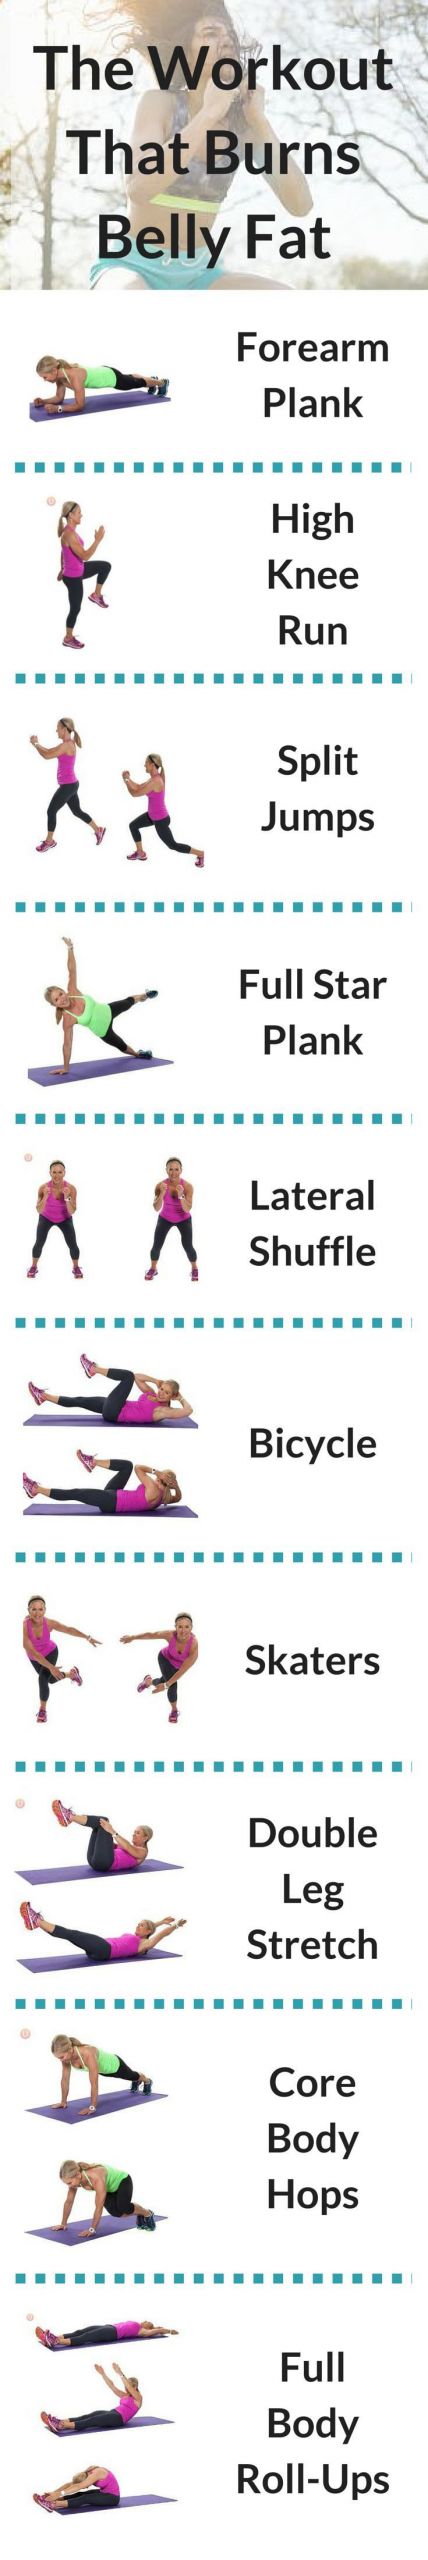 Burn Belly Fat Workout
 The Workout That Burns Belly Fat